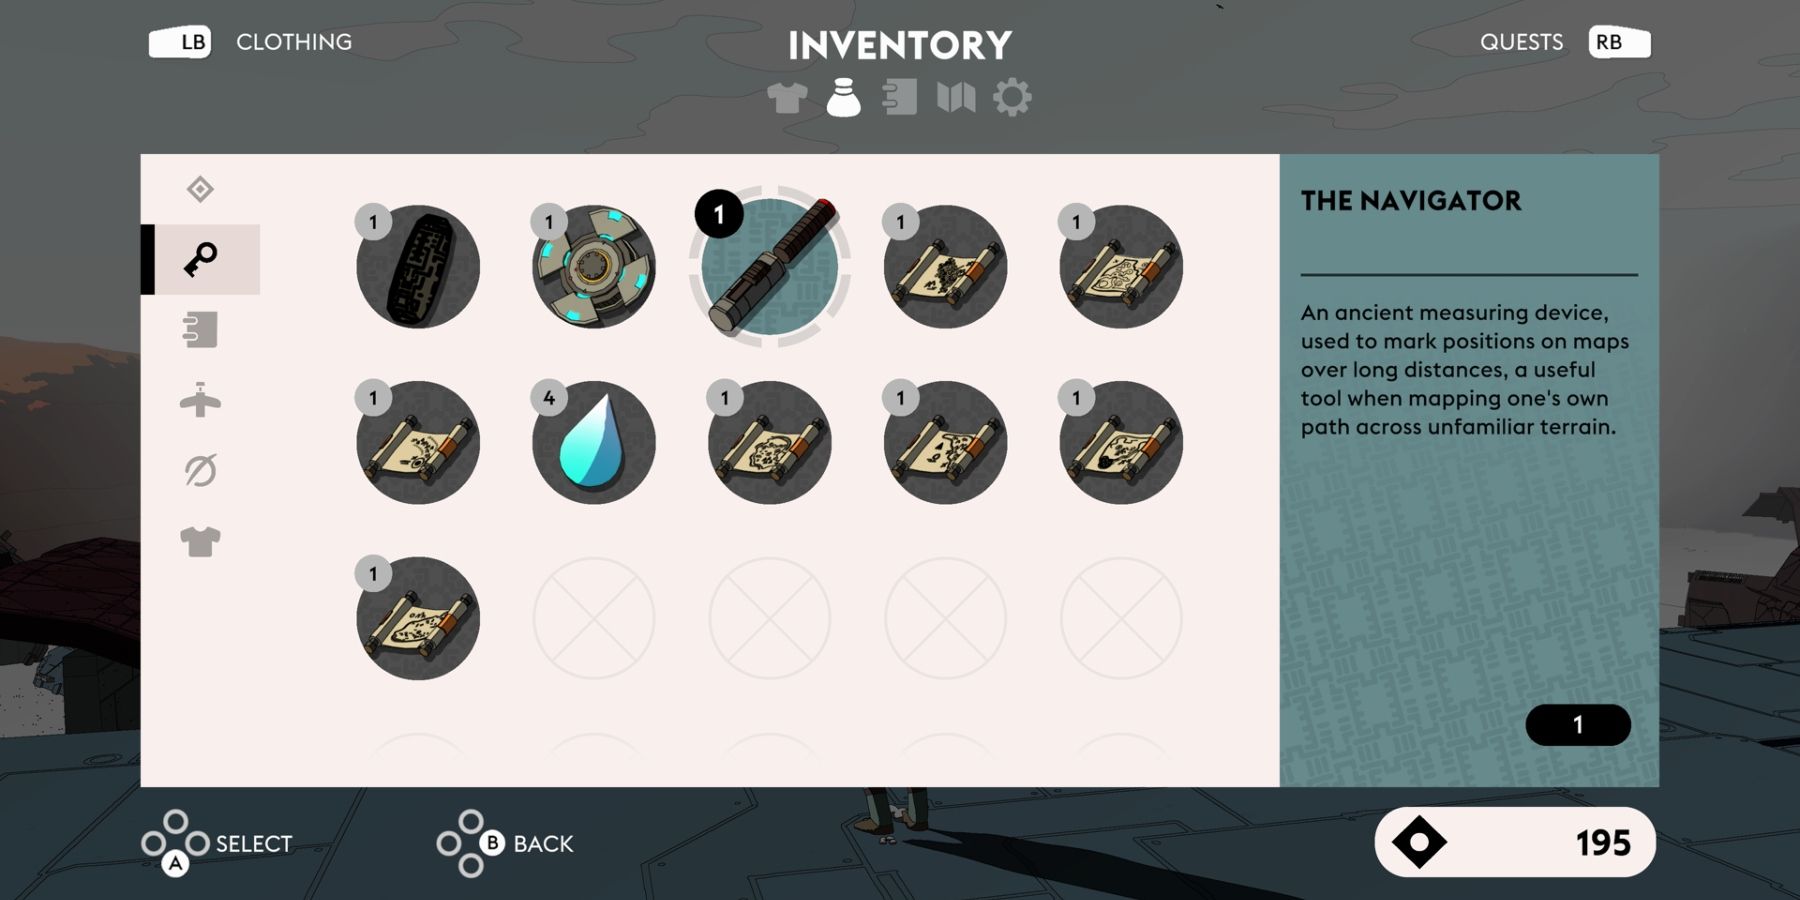 In game menu showing key items like the Navigator with explanation text on the right